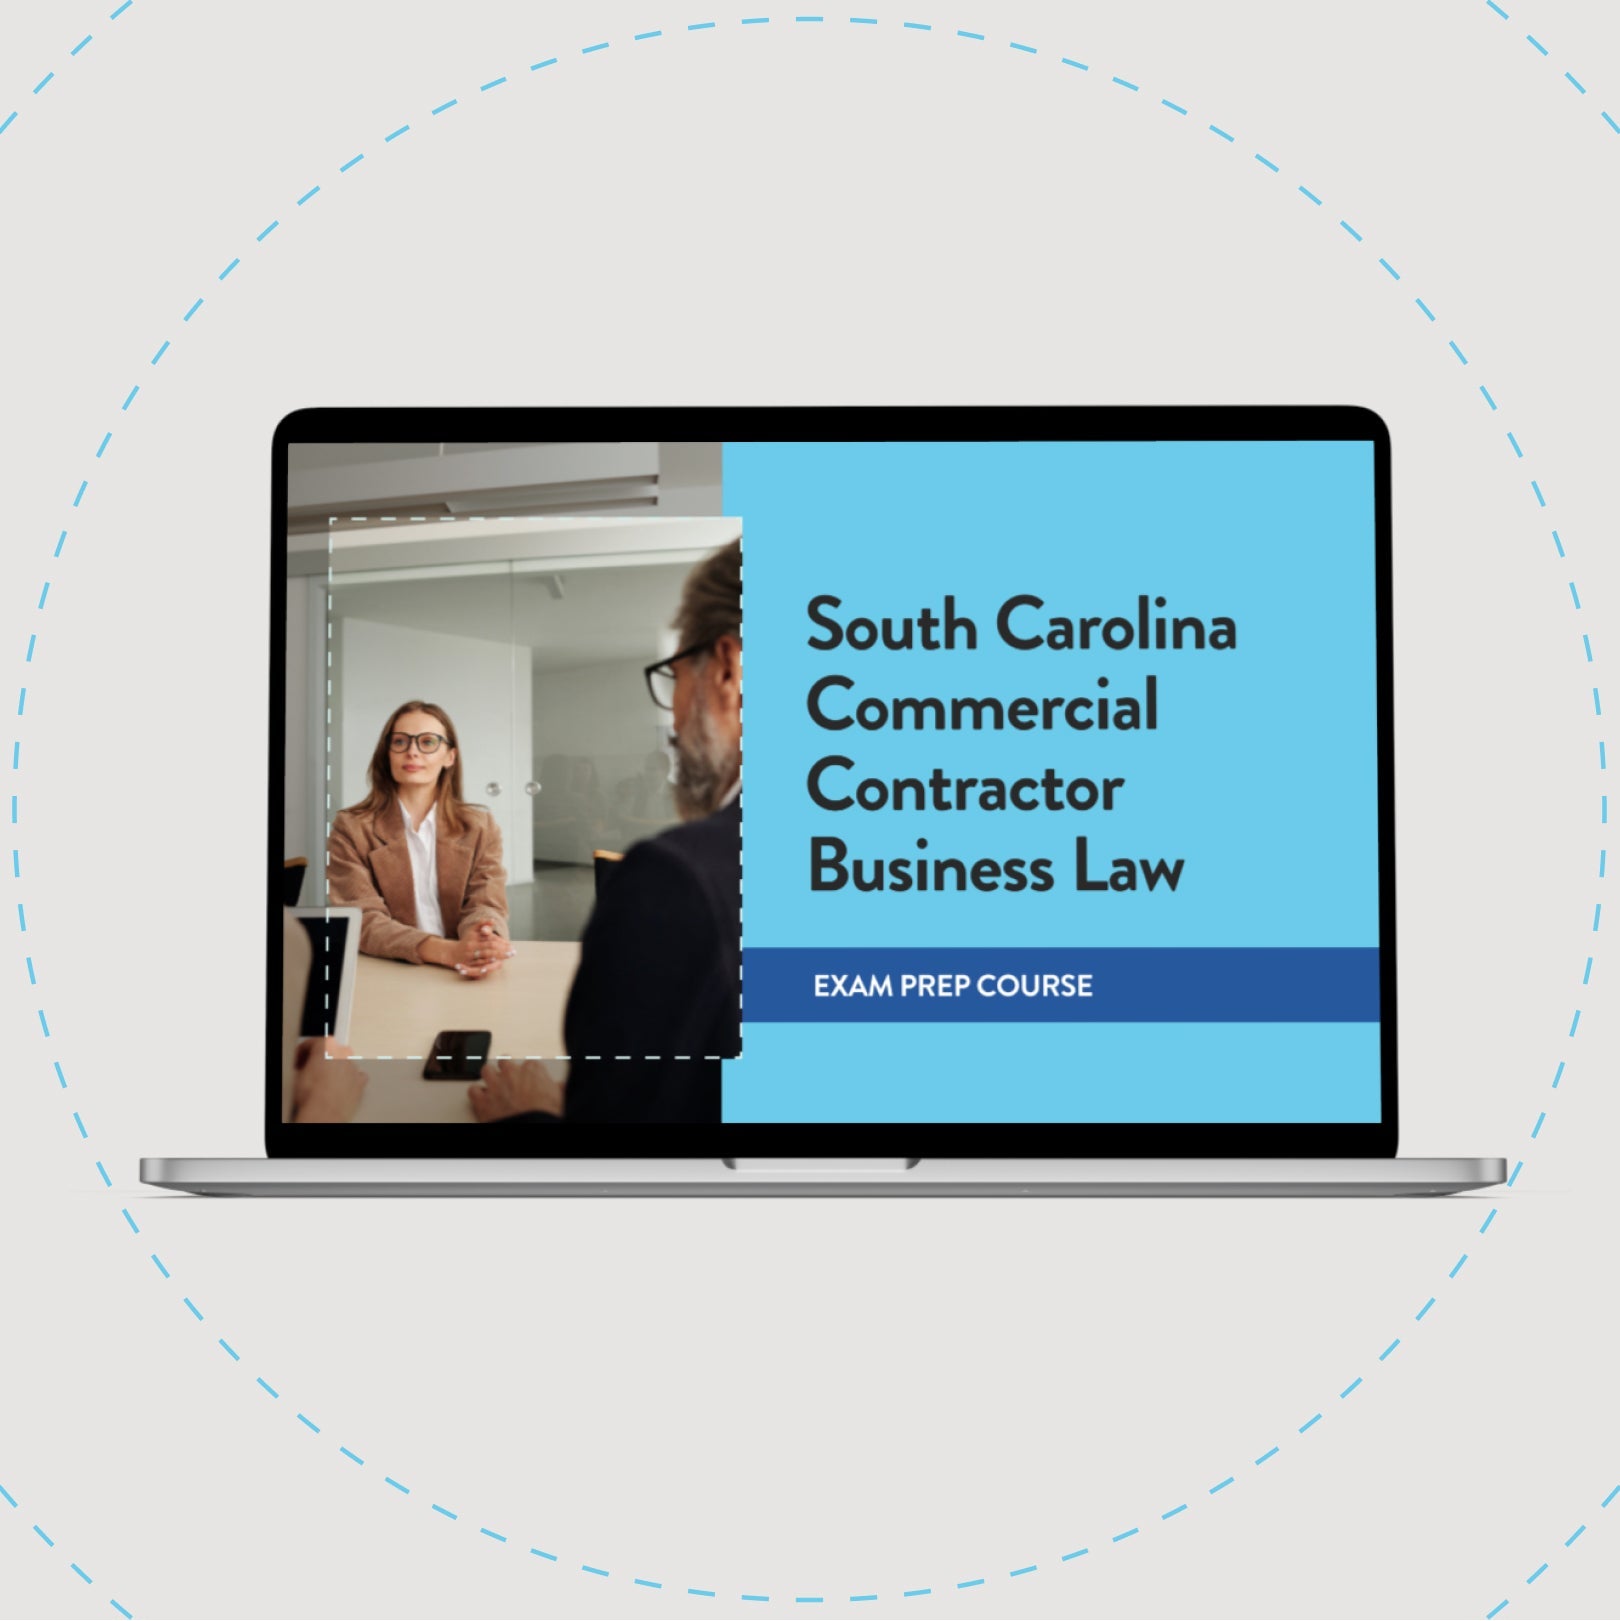 South Carolina Commercial Contractor Business Law Exam Prep Course